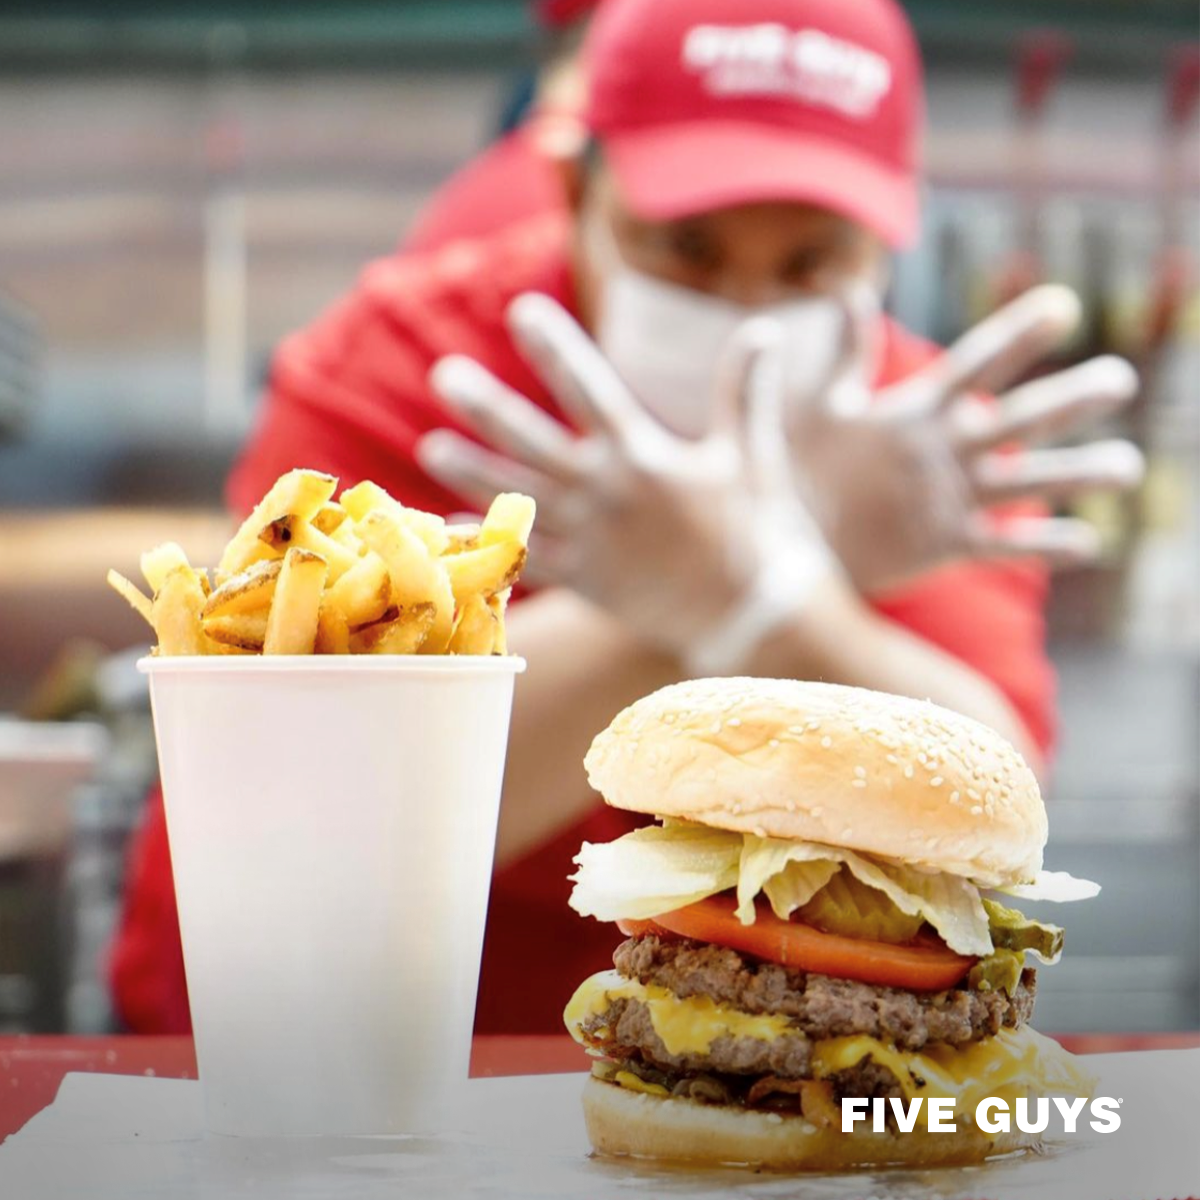 burger made with the quality of the Five guys brand